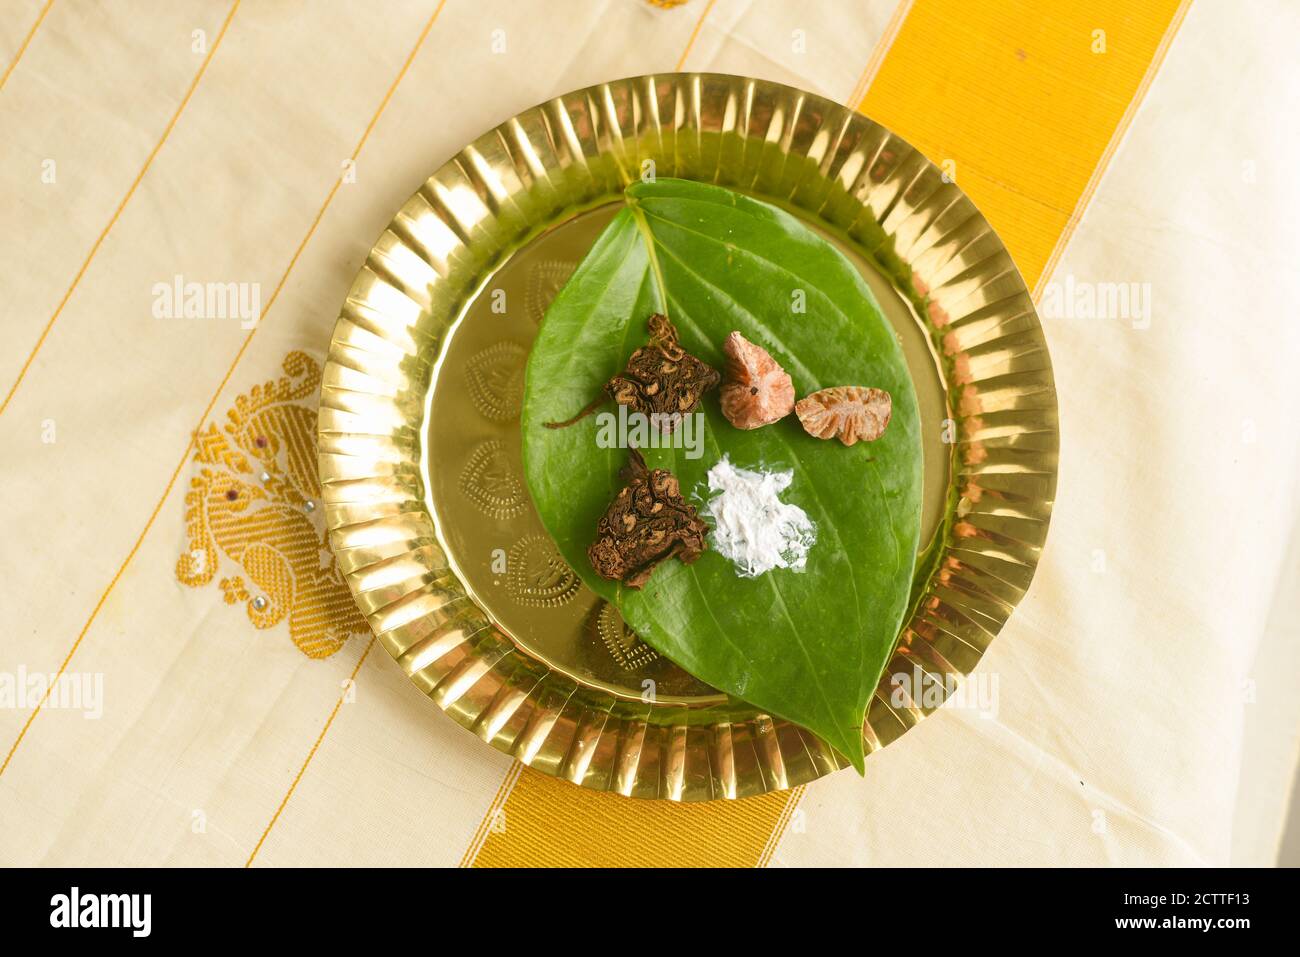 Betel leaf with areca nut paan masala, Kerala Onam festival giving Dakshina, Indian culture monastery, temple, spiritual guide or after a ritual Pooja Stock Photo